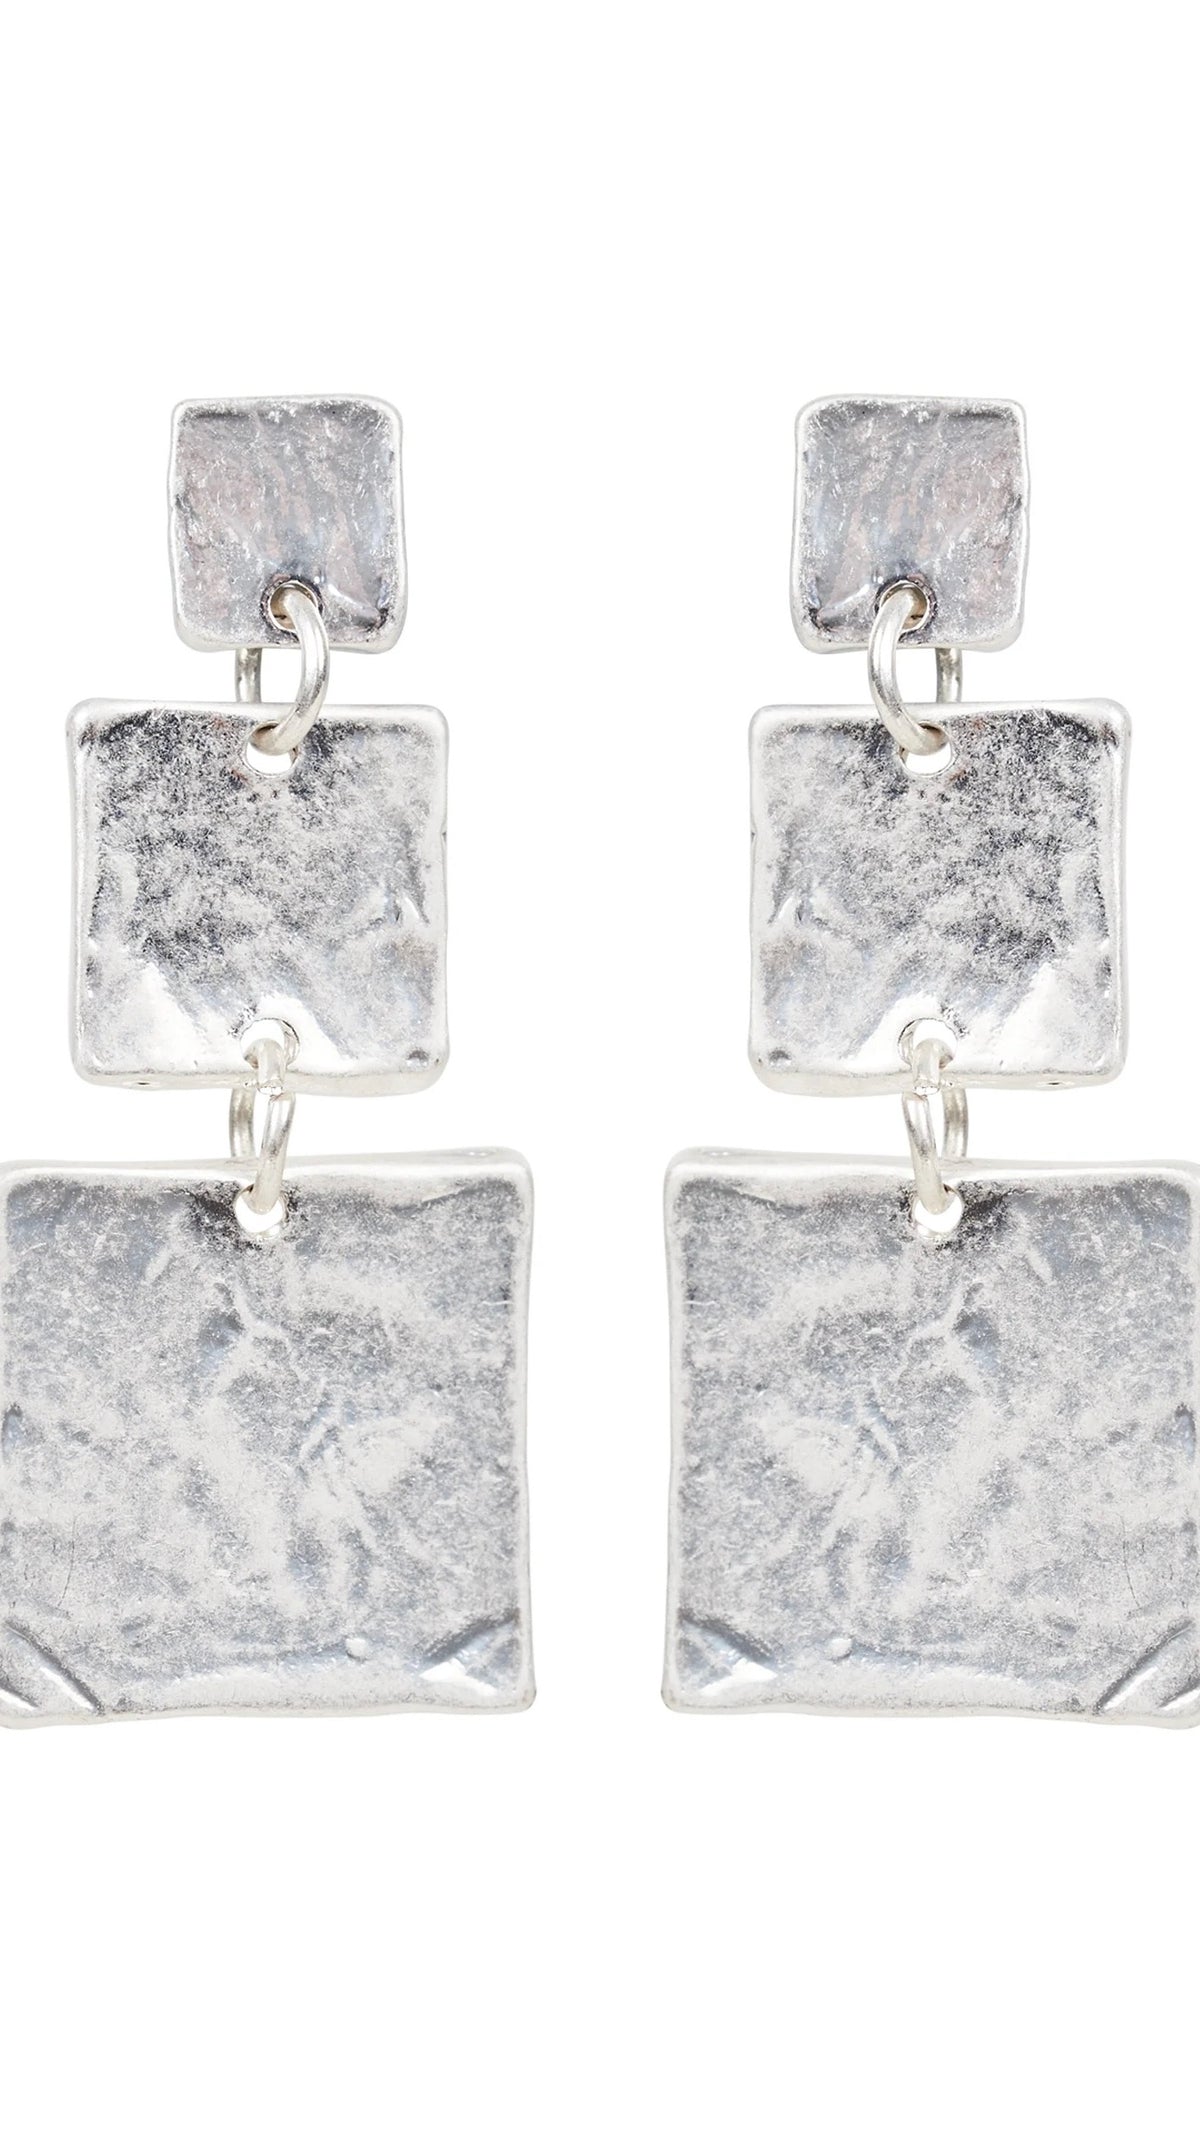 Paarl Square Drop Earring Silver